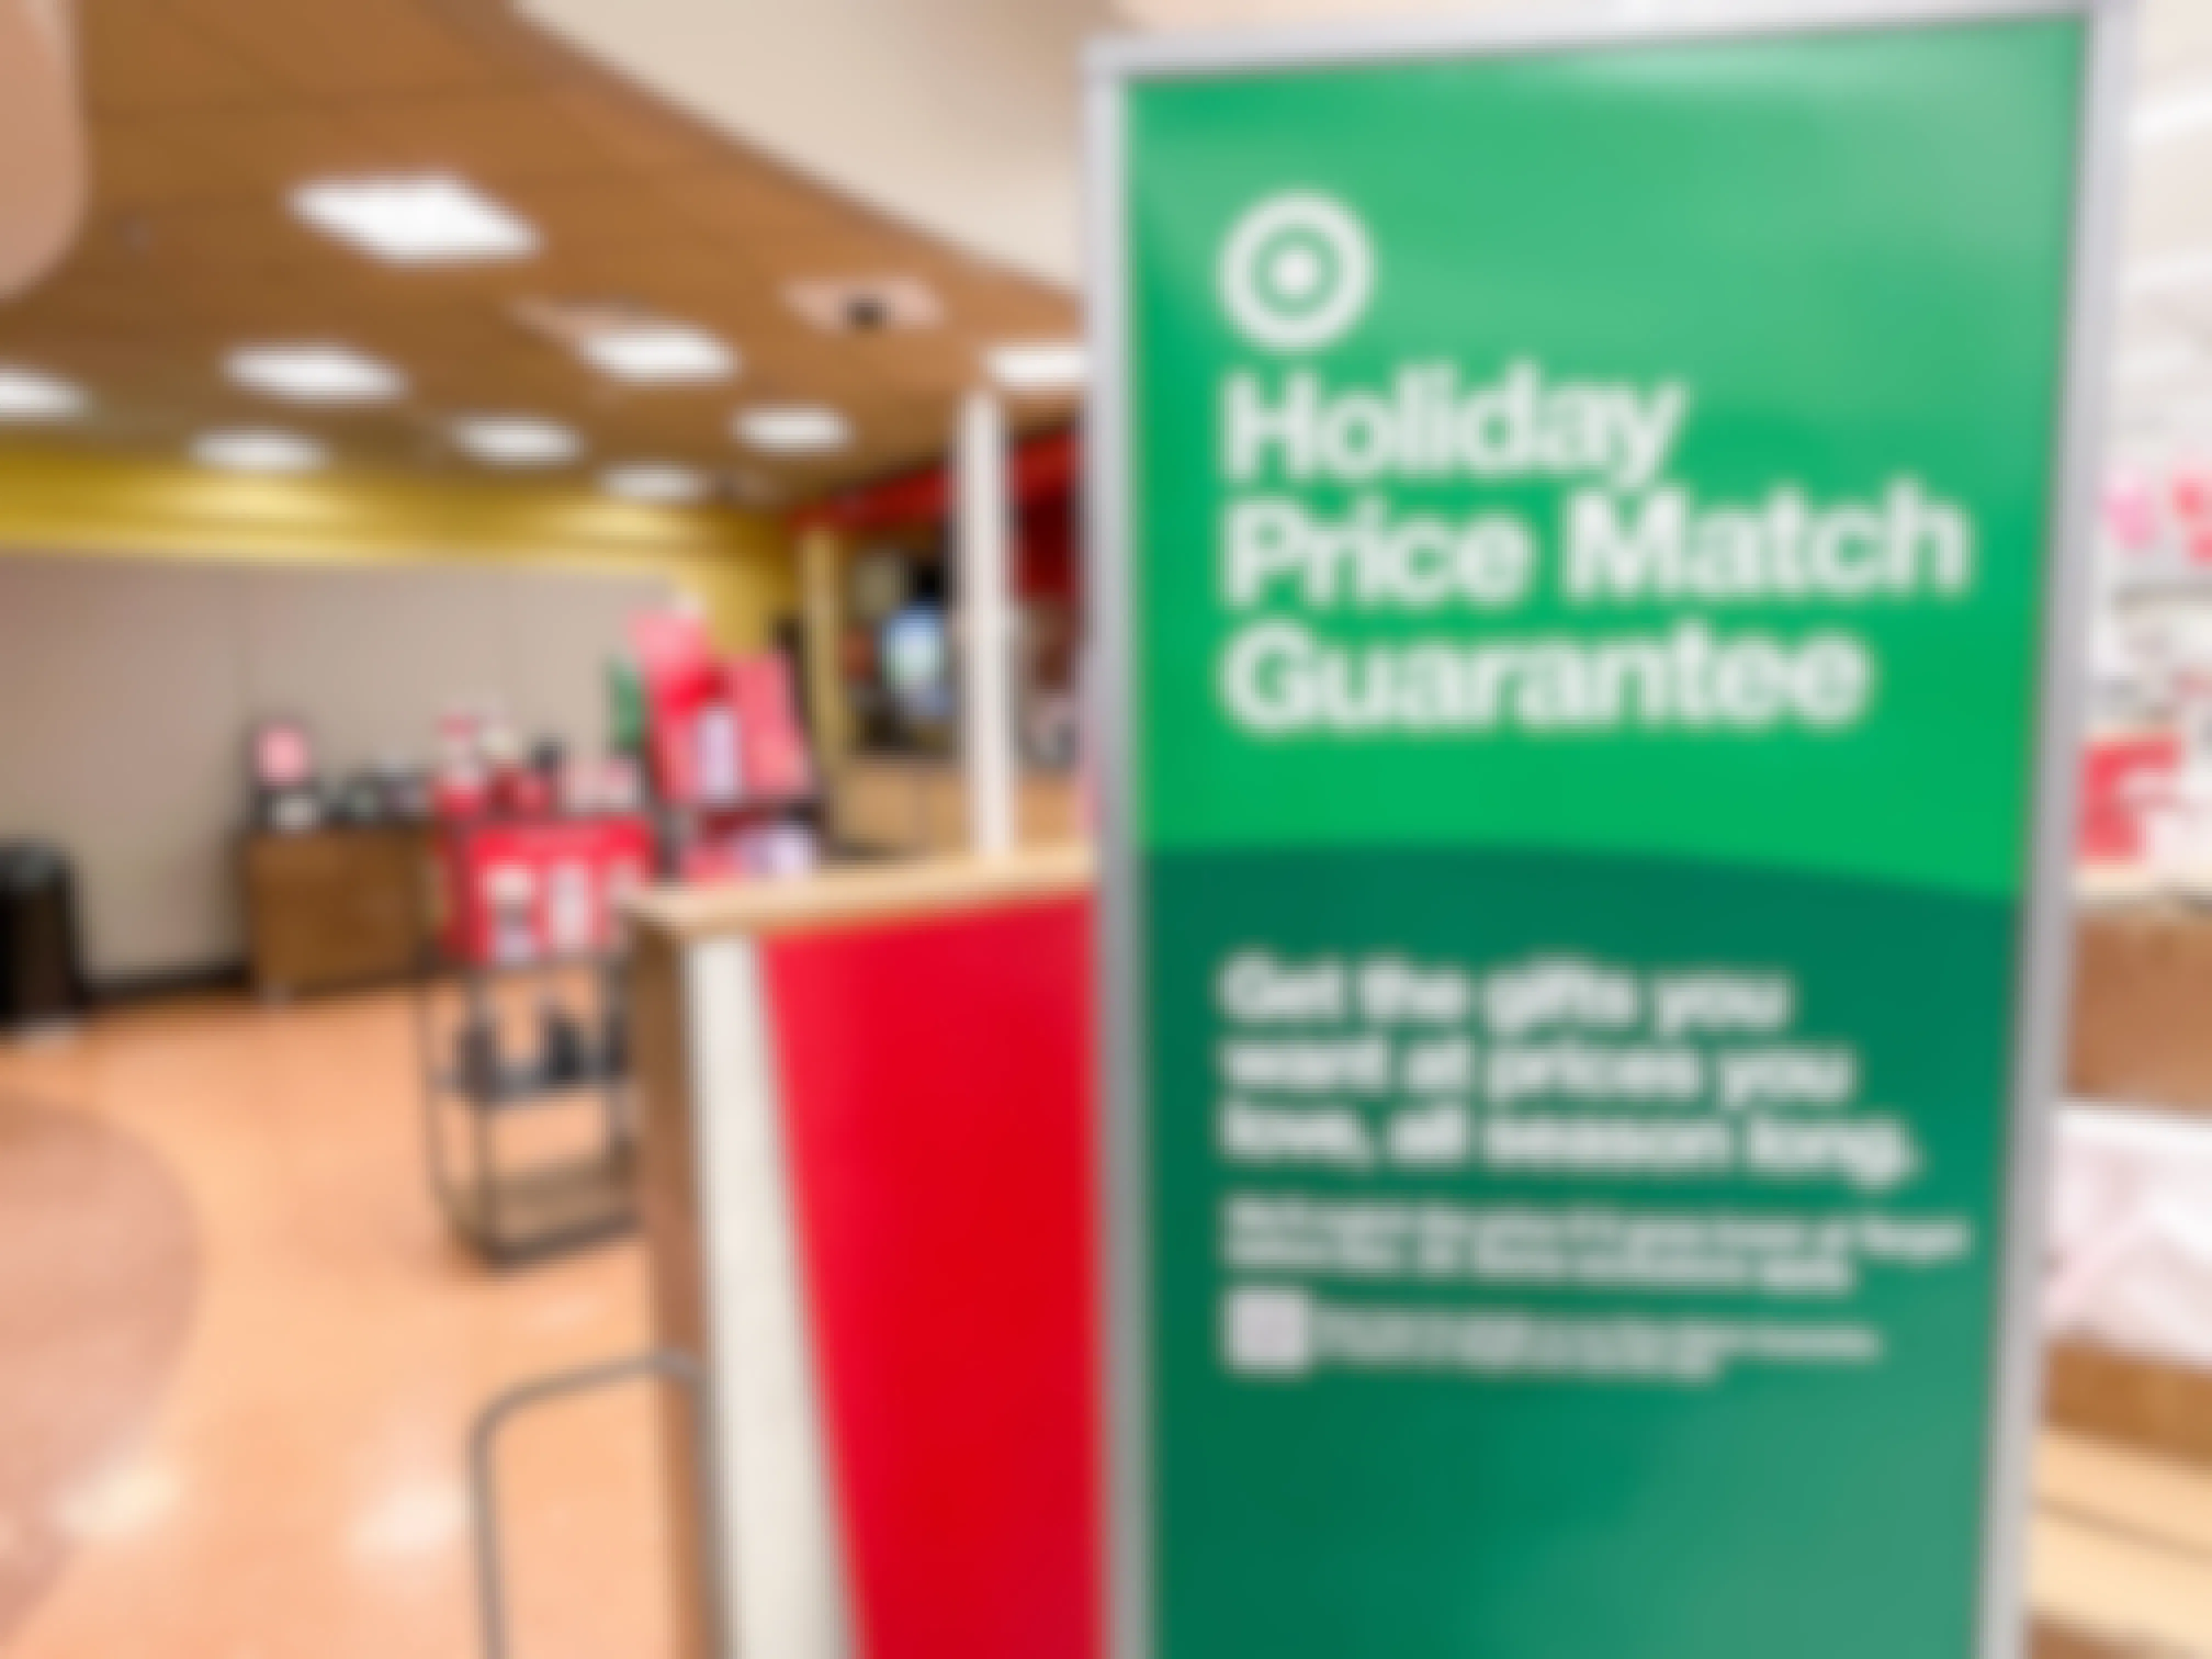 A holiday price match guarantee sign inside Target.